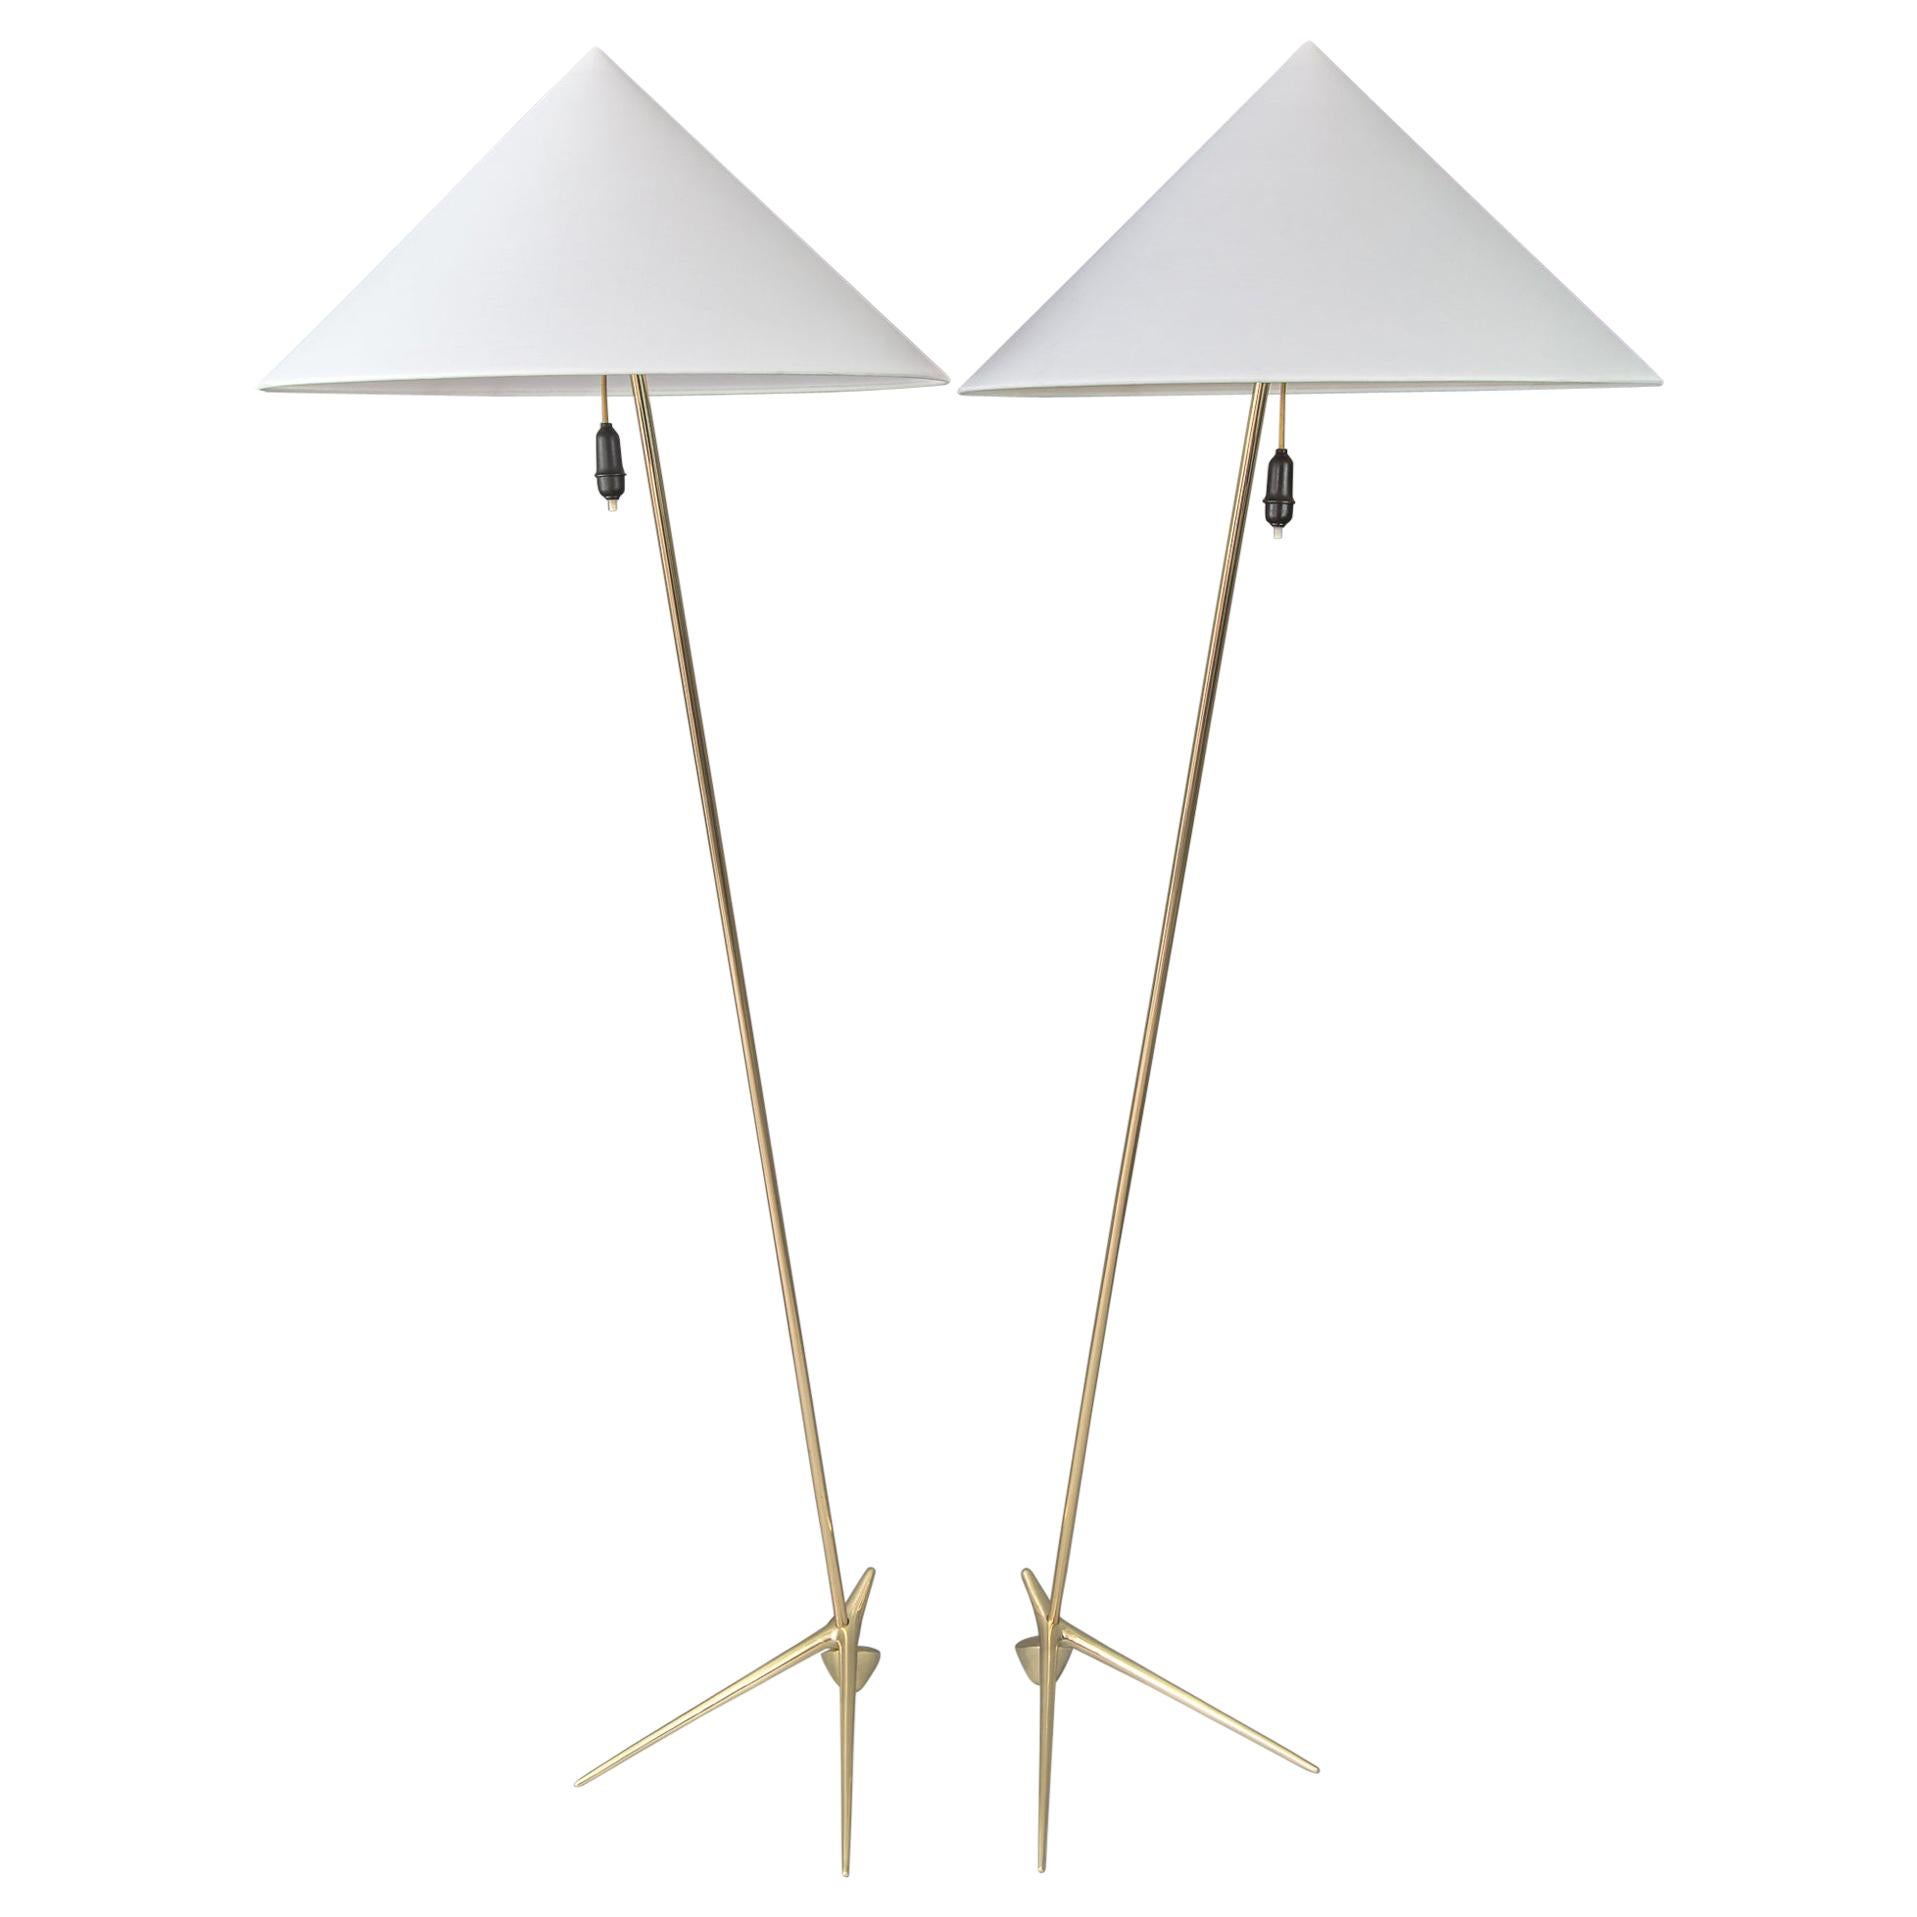 Two Charming golf floor lamps, designed by Rupert Nikoll, Vienna, 1950